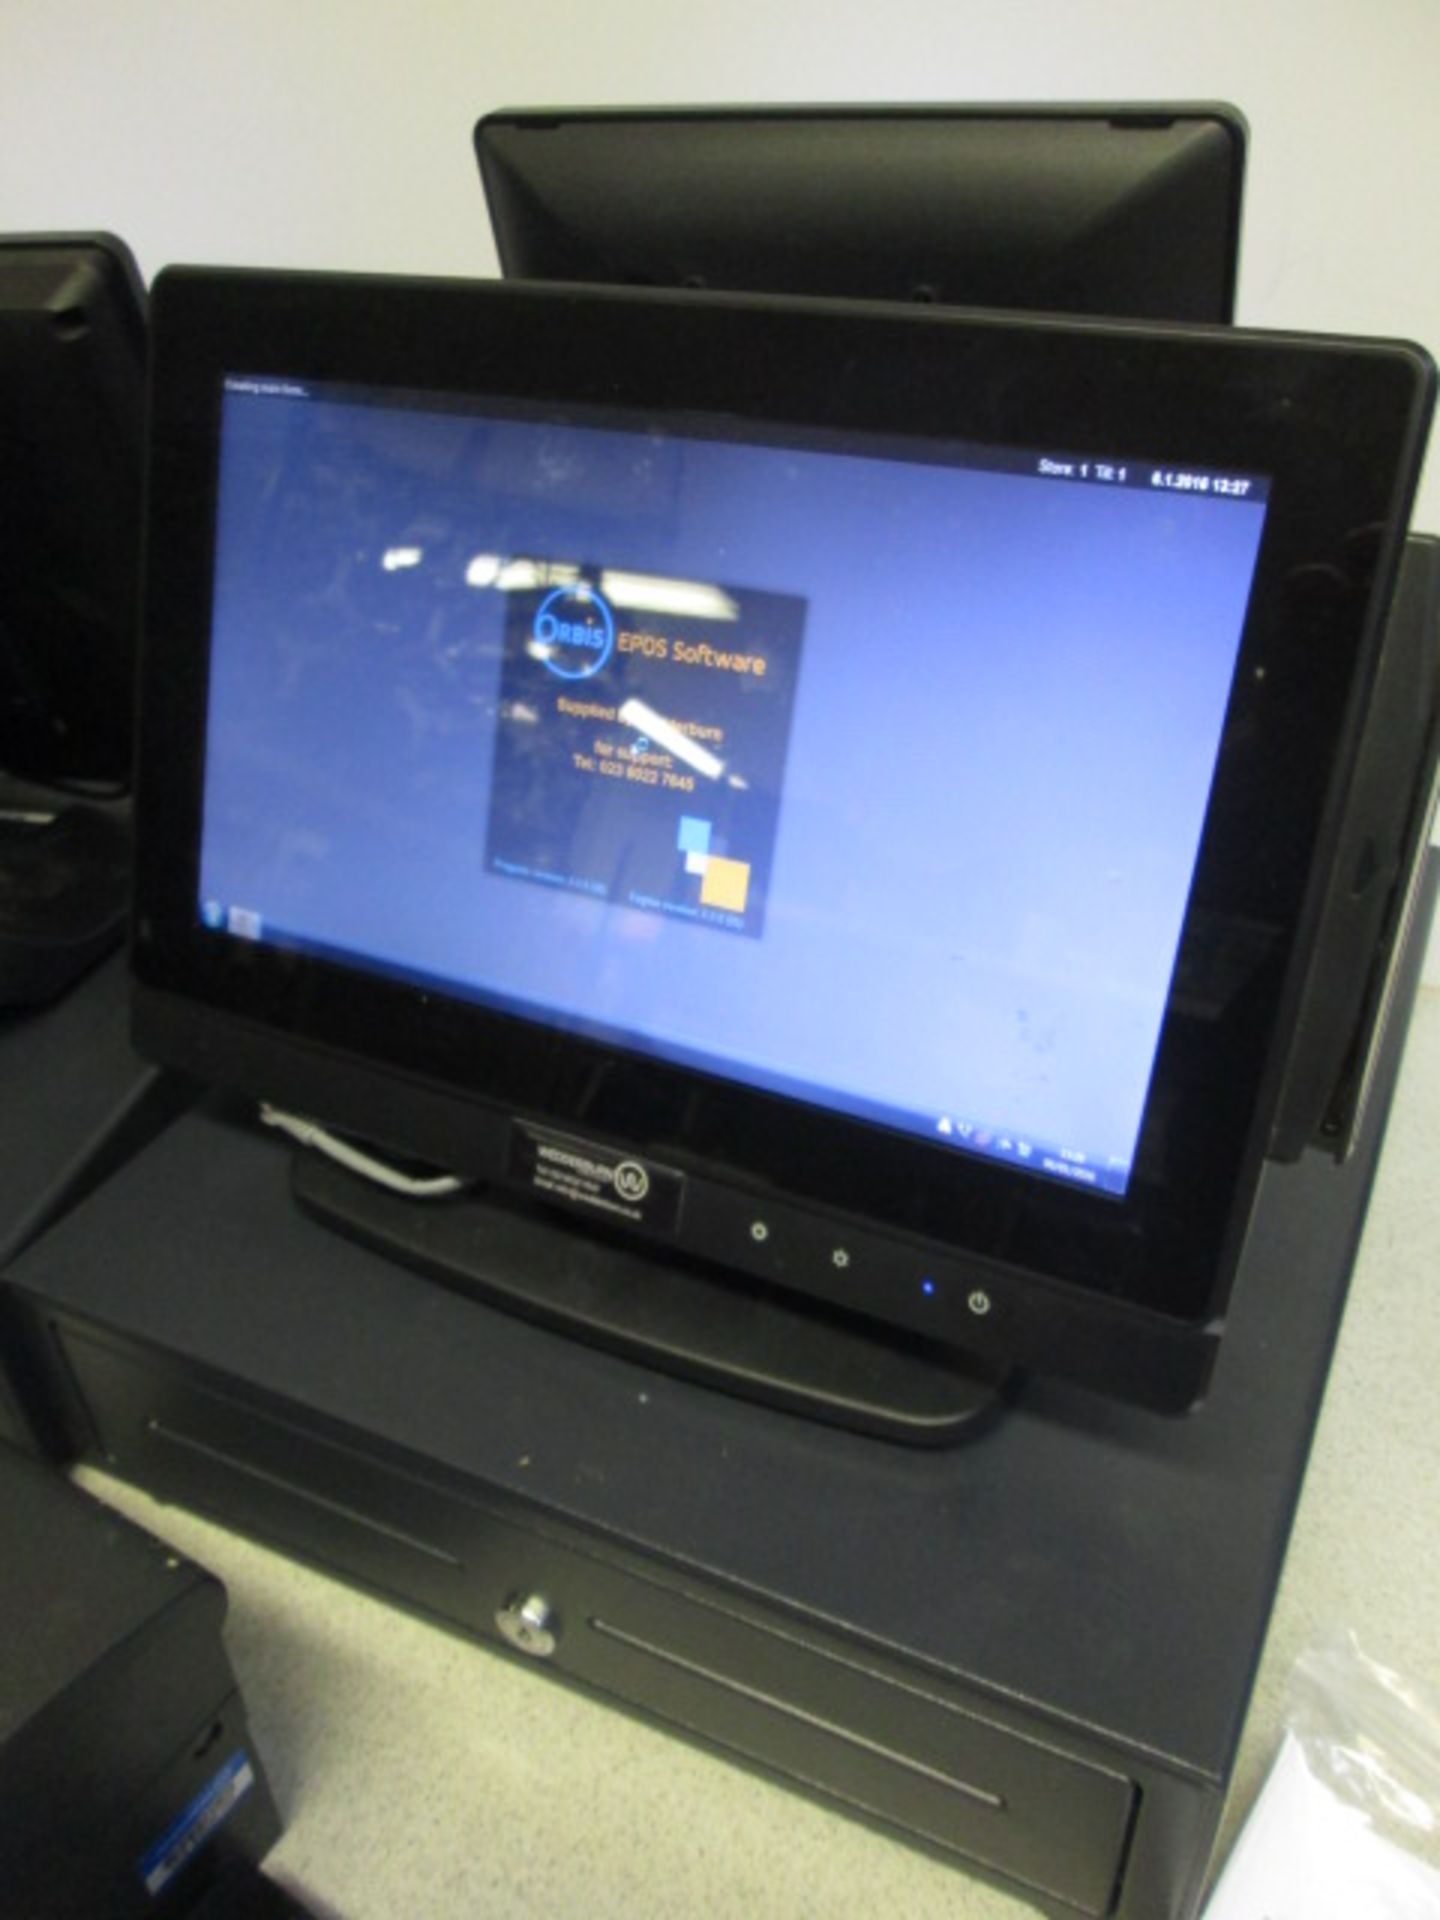 Epos System to Include: 3 x Dual Screen Posiflex LCD Touchscreen Terminals (Model XT-3114 ) with - Image 4 of 13